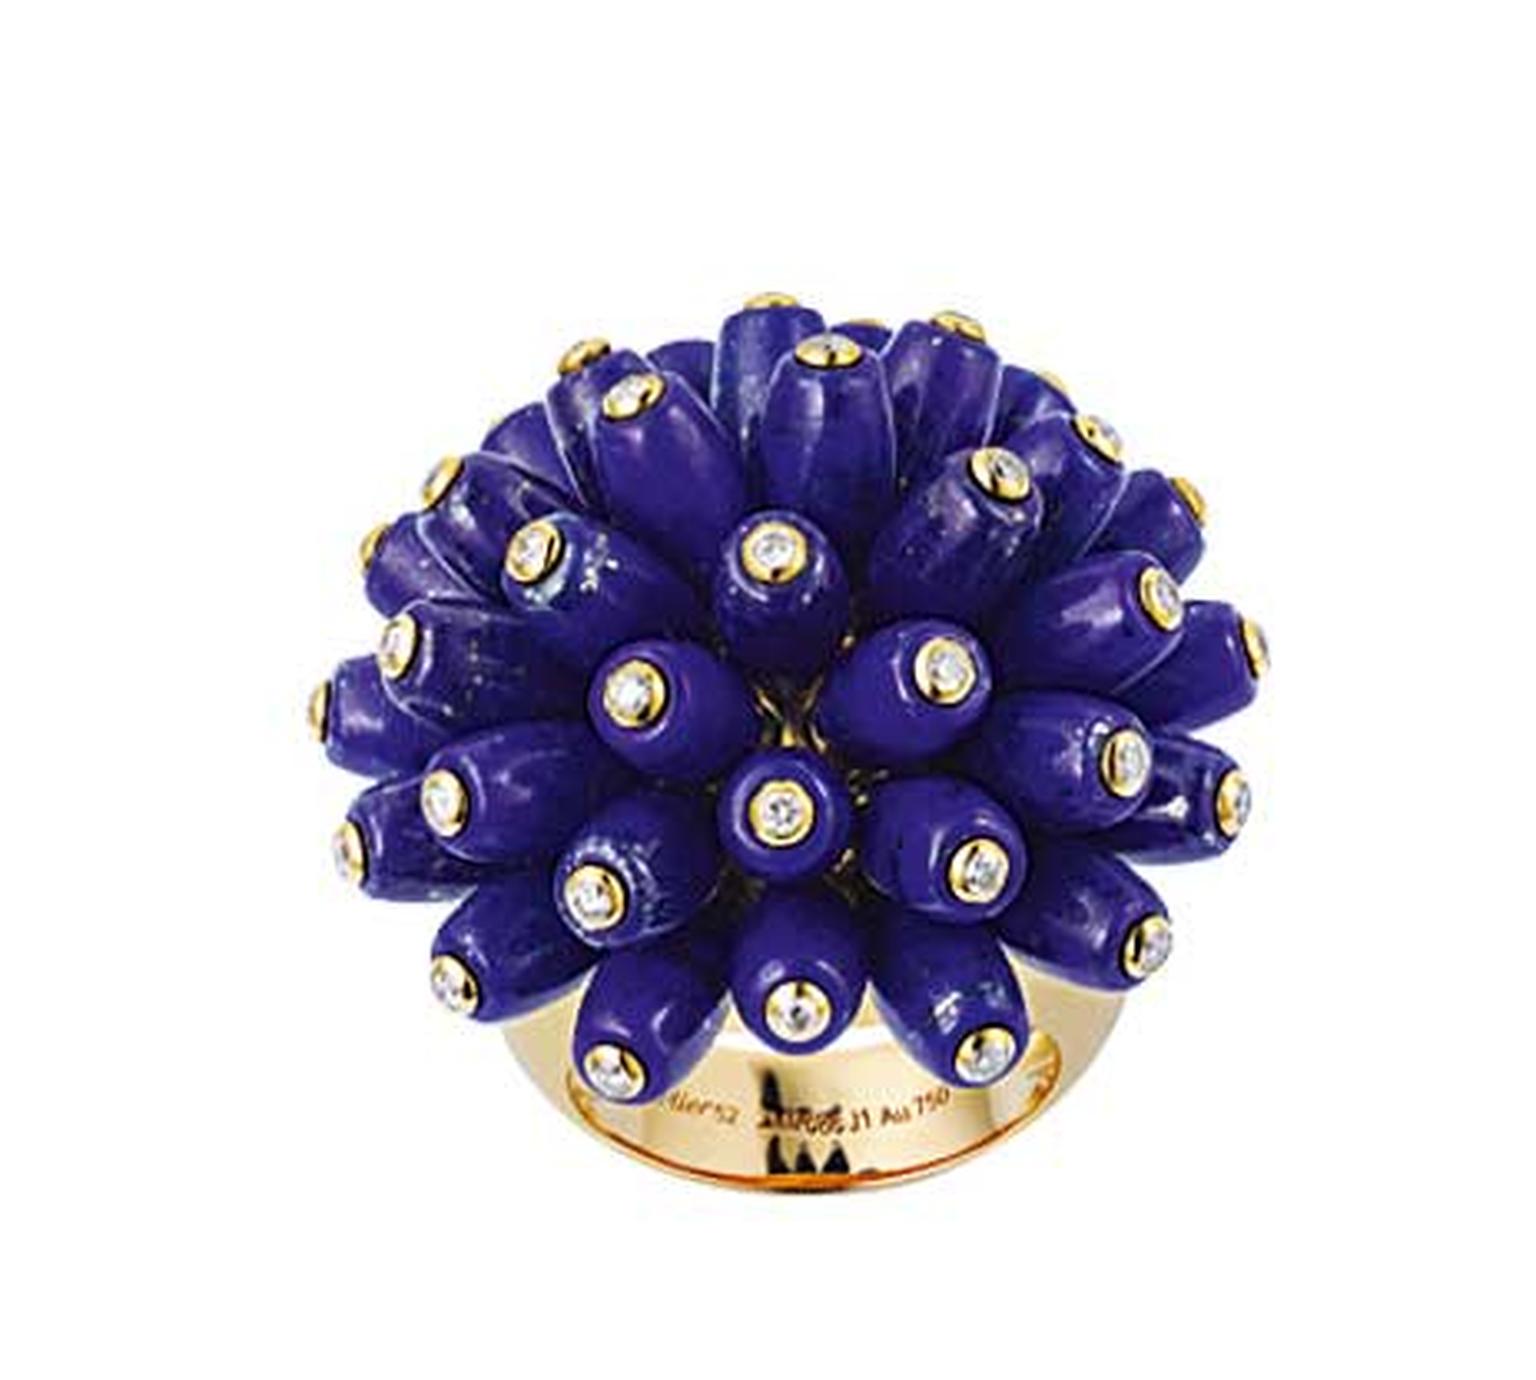 The unique design of this Cartier ring, with its lapis lazuli tubes dotted with diamonds that writhe and wriggle, brings Cartier jewellery bang into the 21st century.